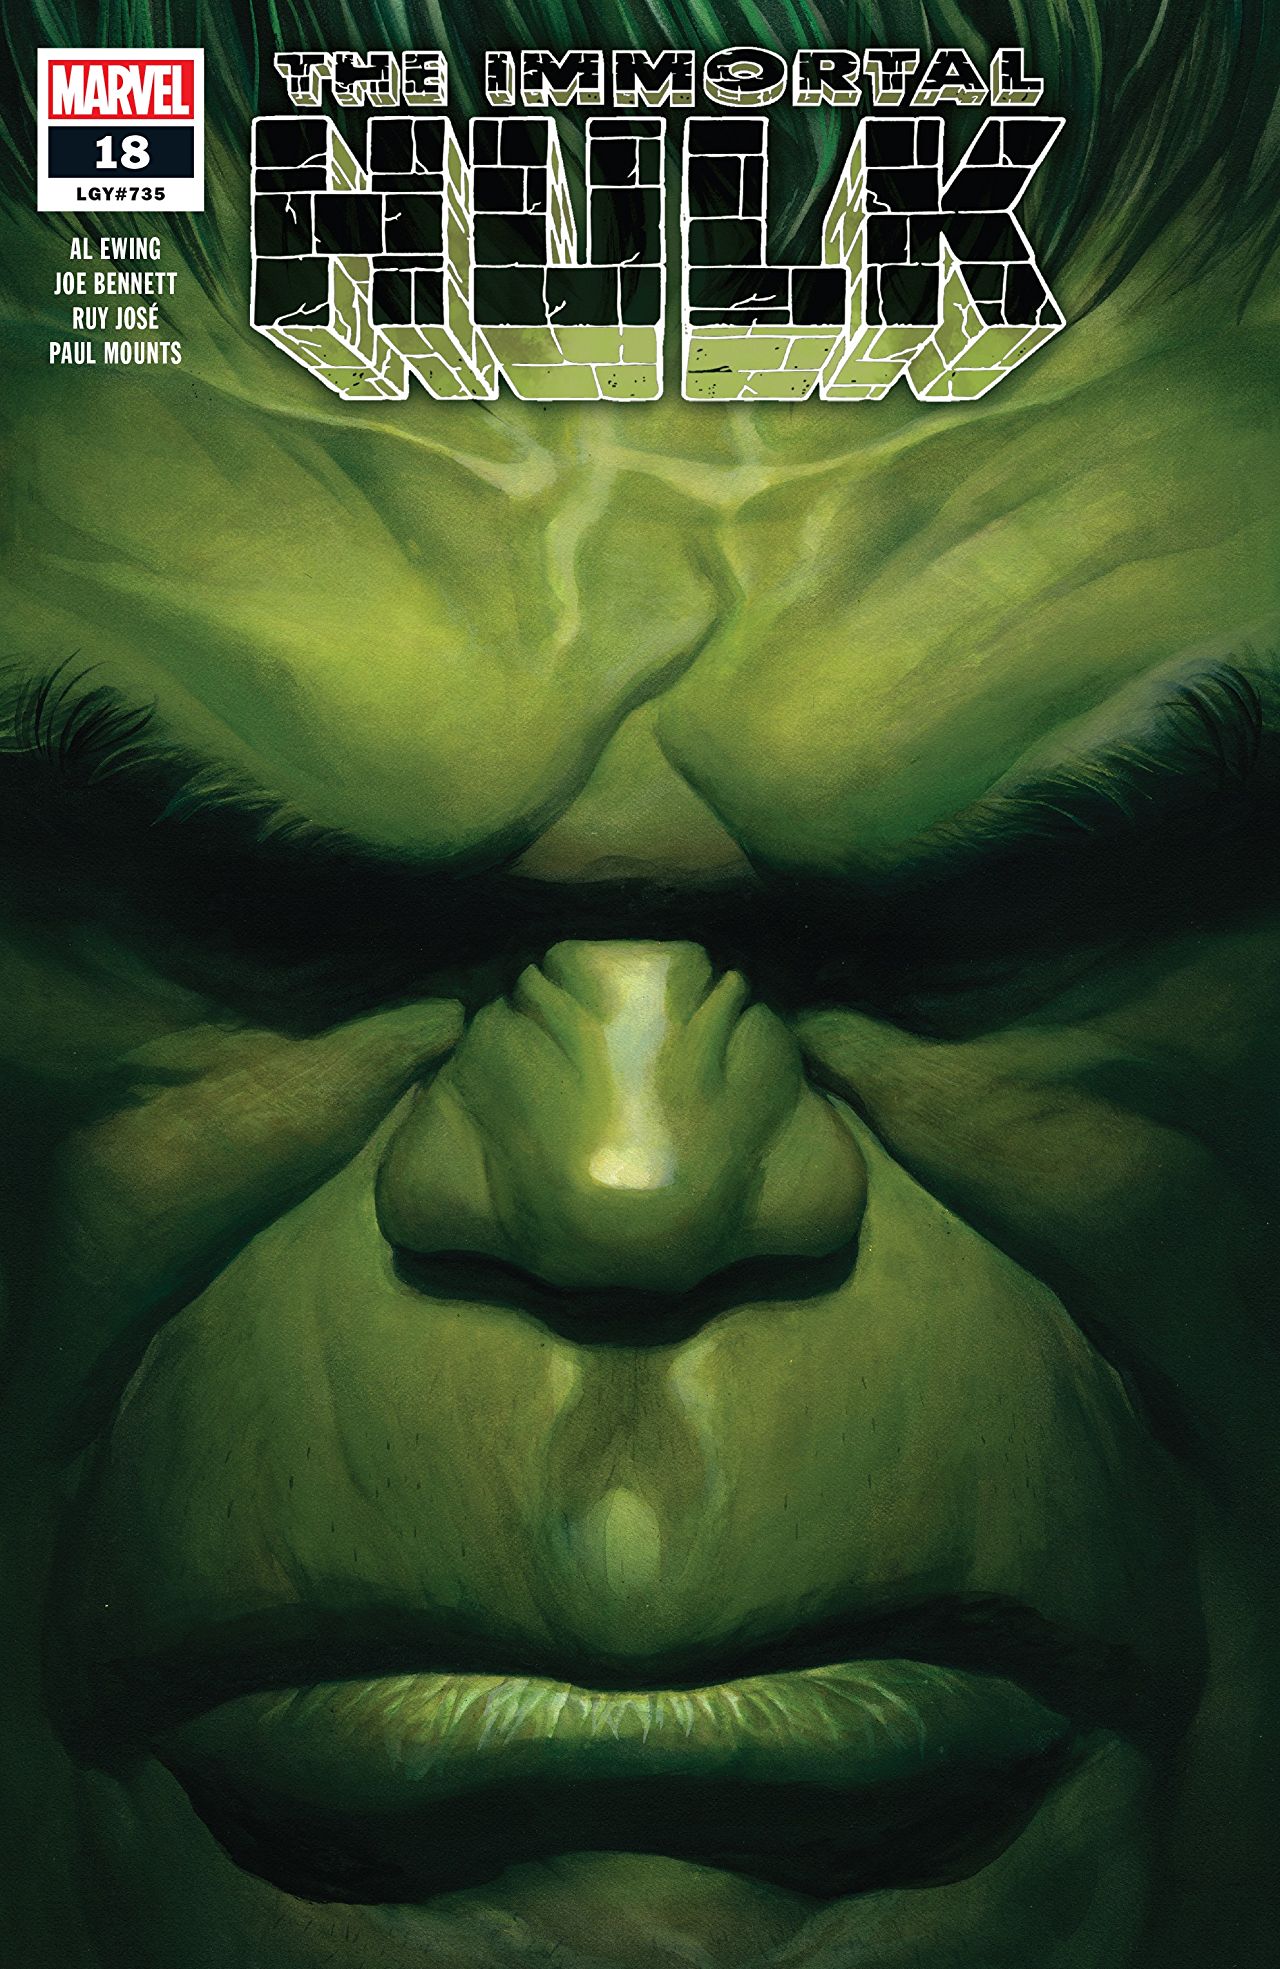 The Immortal Hulk #18 review: Necessary